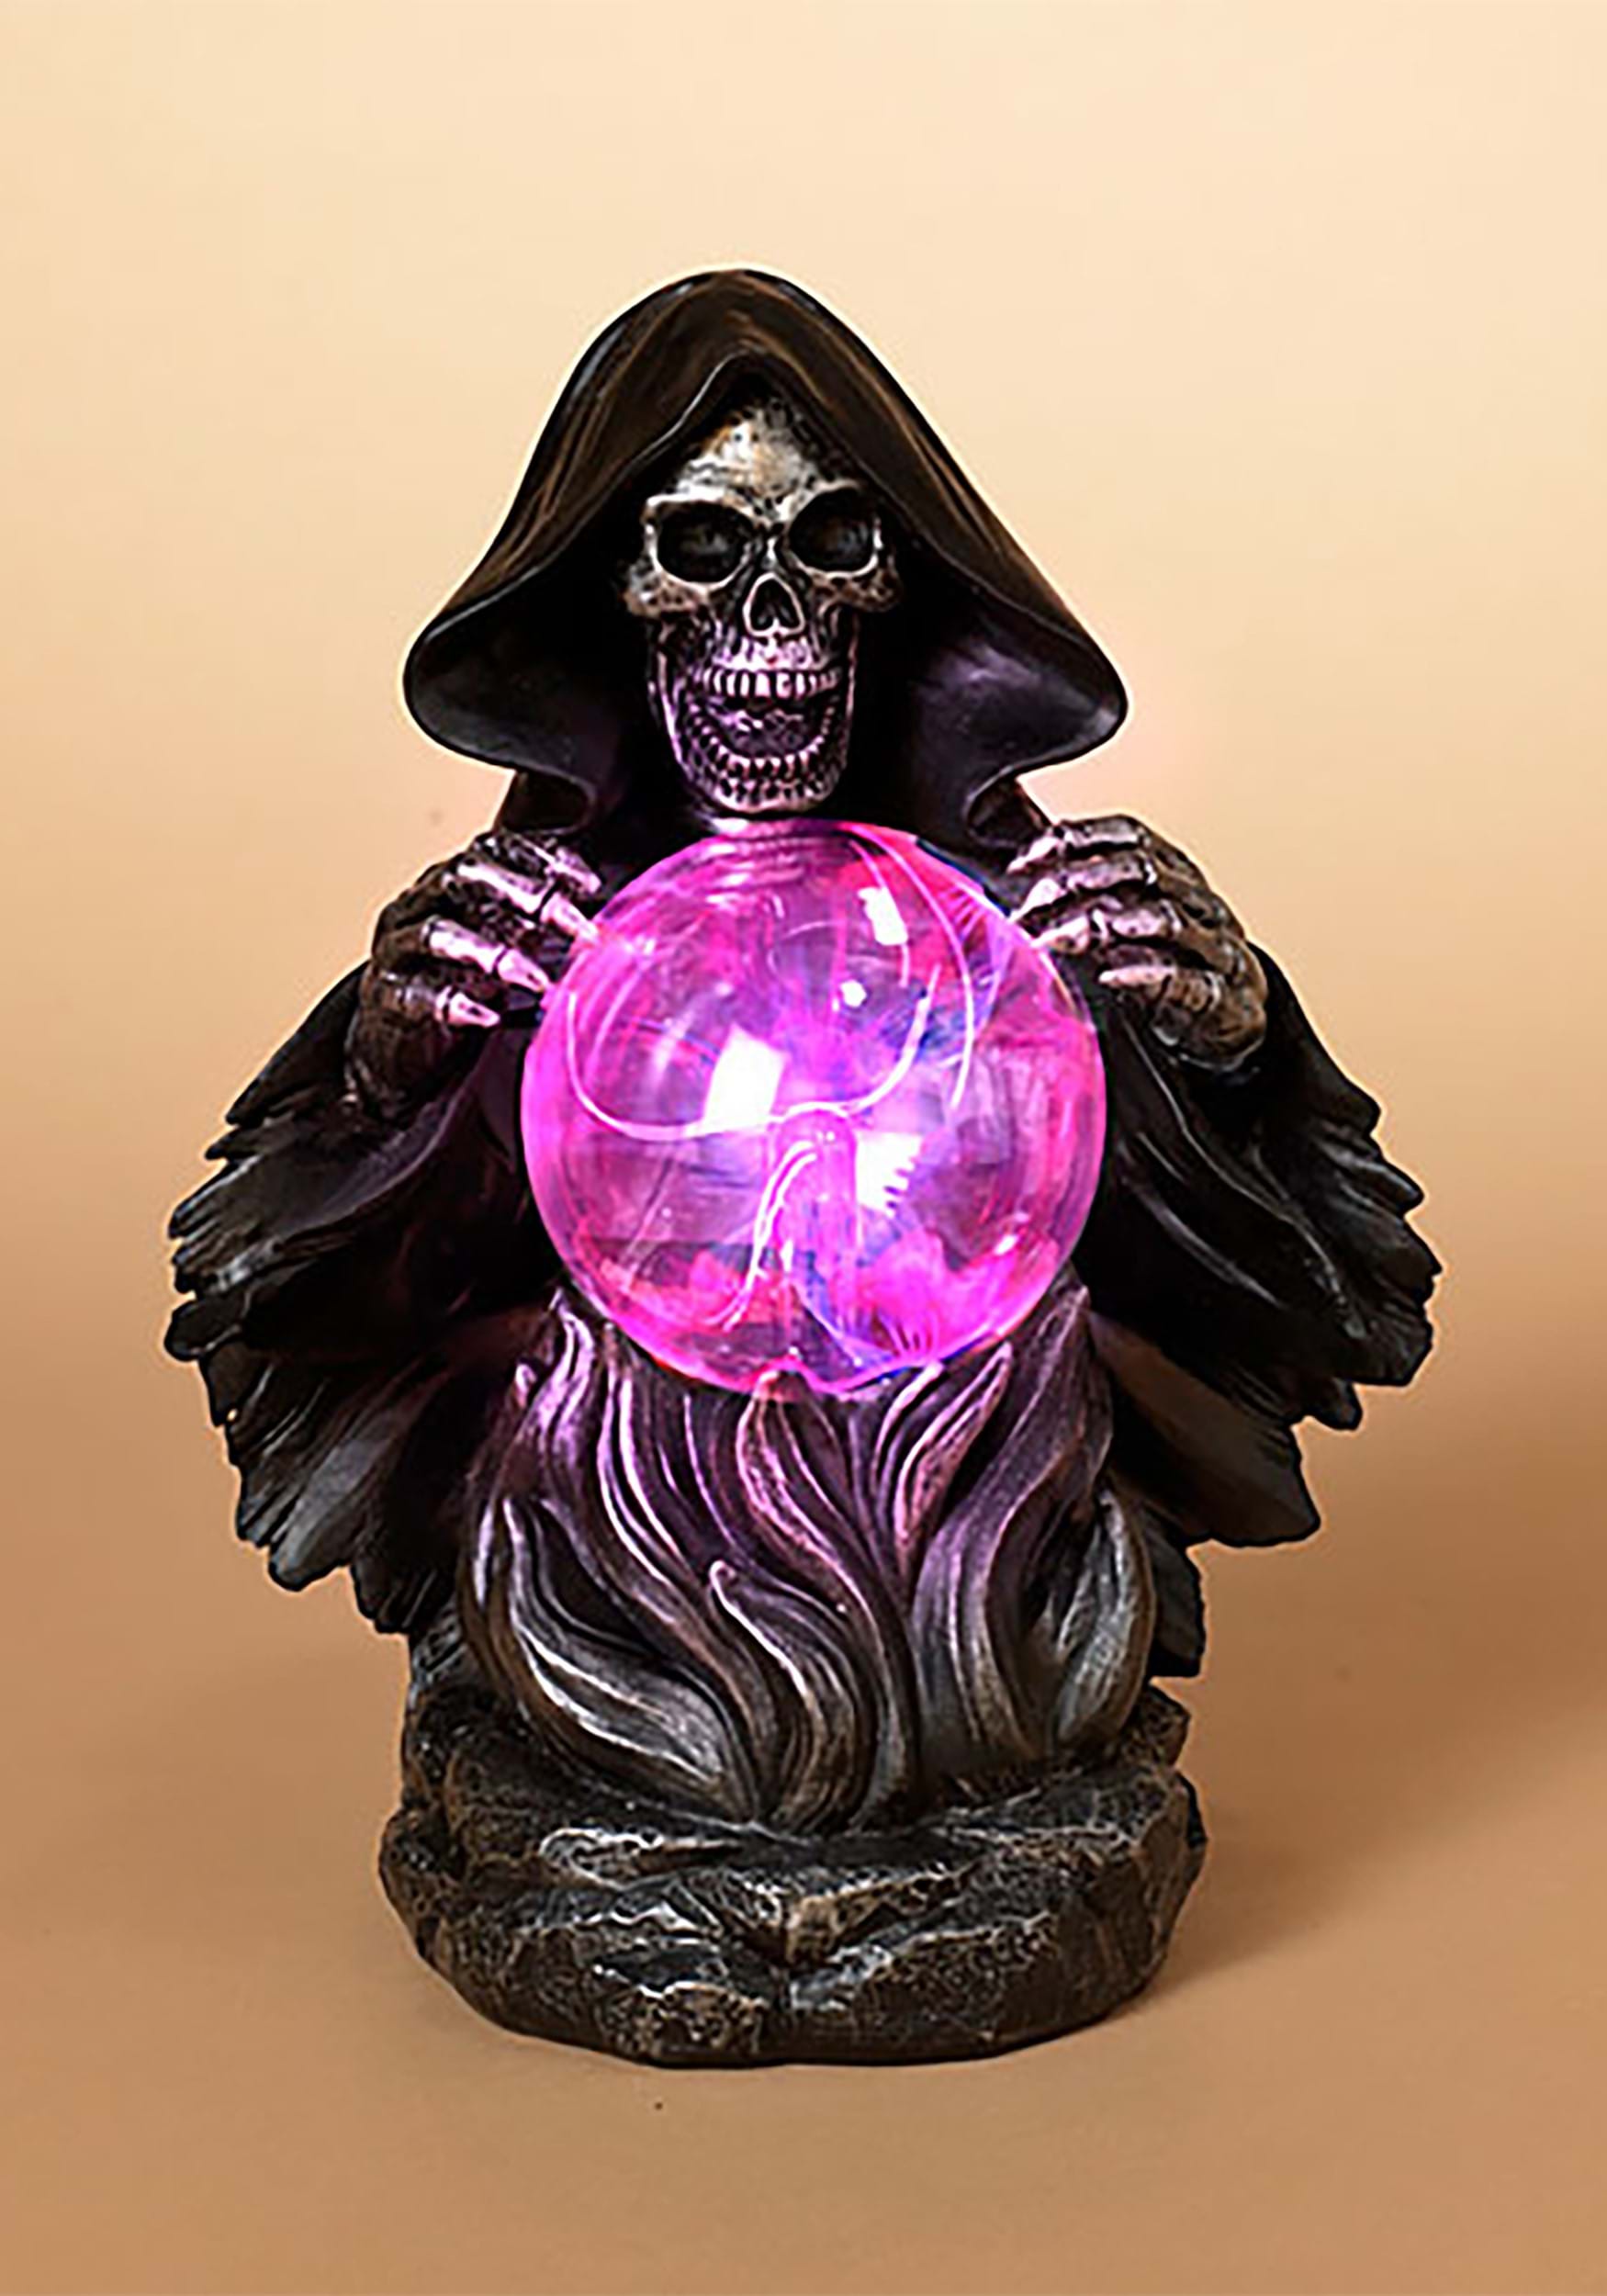 https://images.halloweencostumes.com/products/82705/1-1/9-grim-reaper-w-static-lighted-magic-ball.jpg